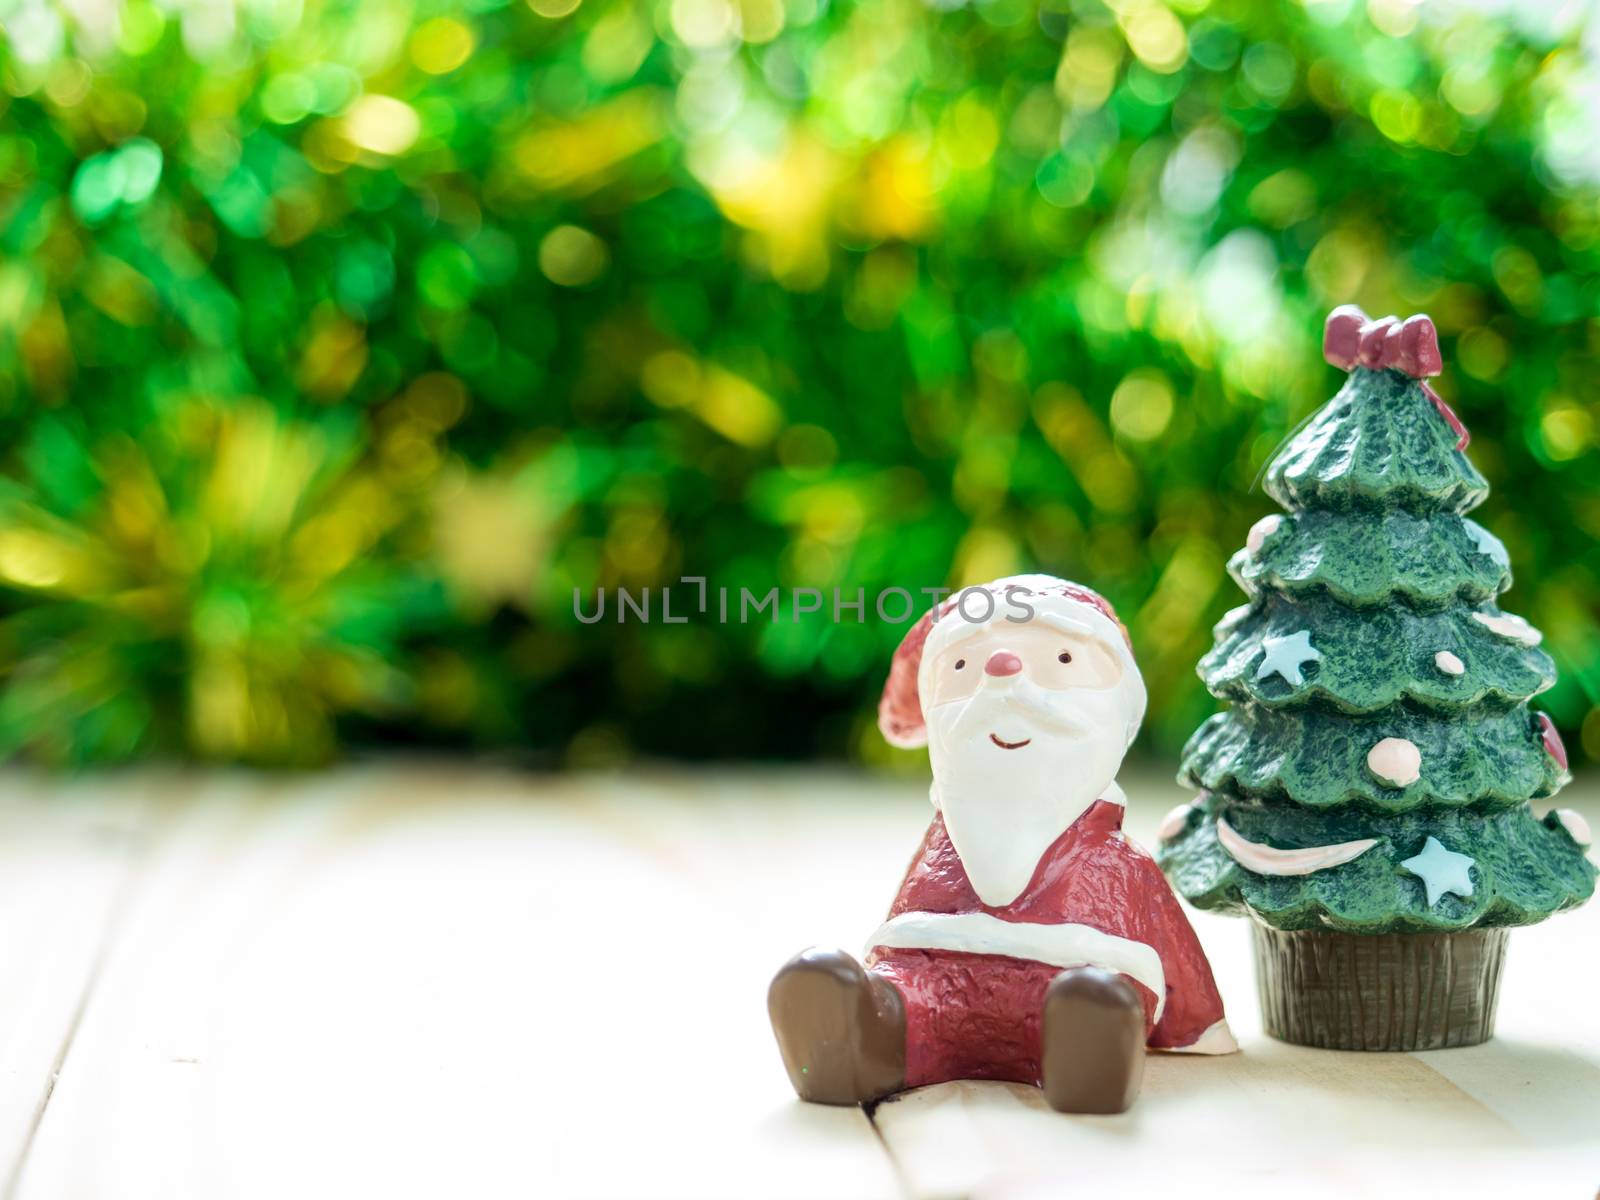 Santa Claus , decoration merry christmas & happy new year, select focus style